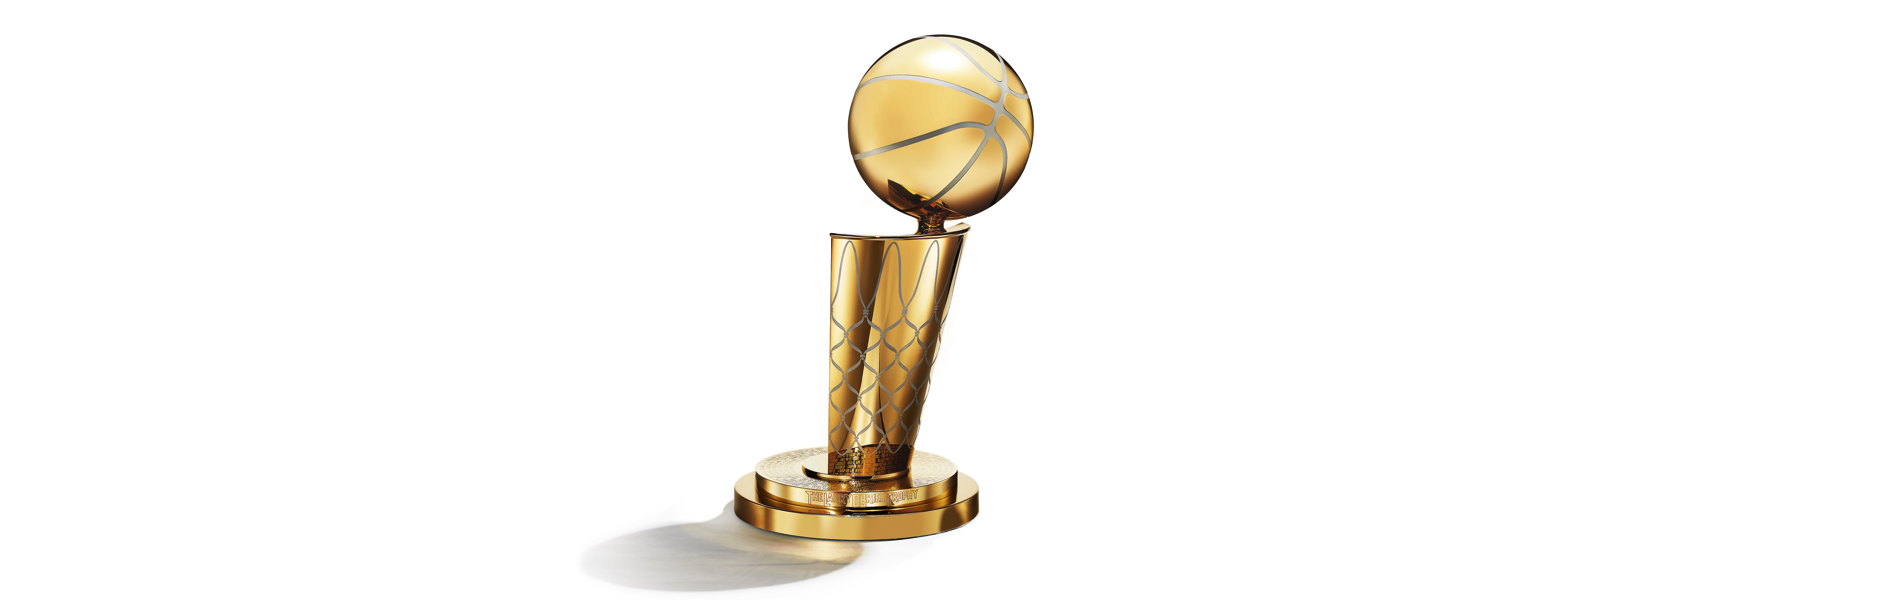 NBA releases new trophies designed by Tiffany & Co and Victor